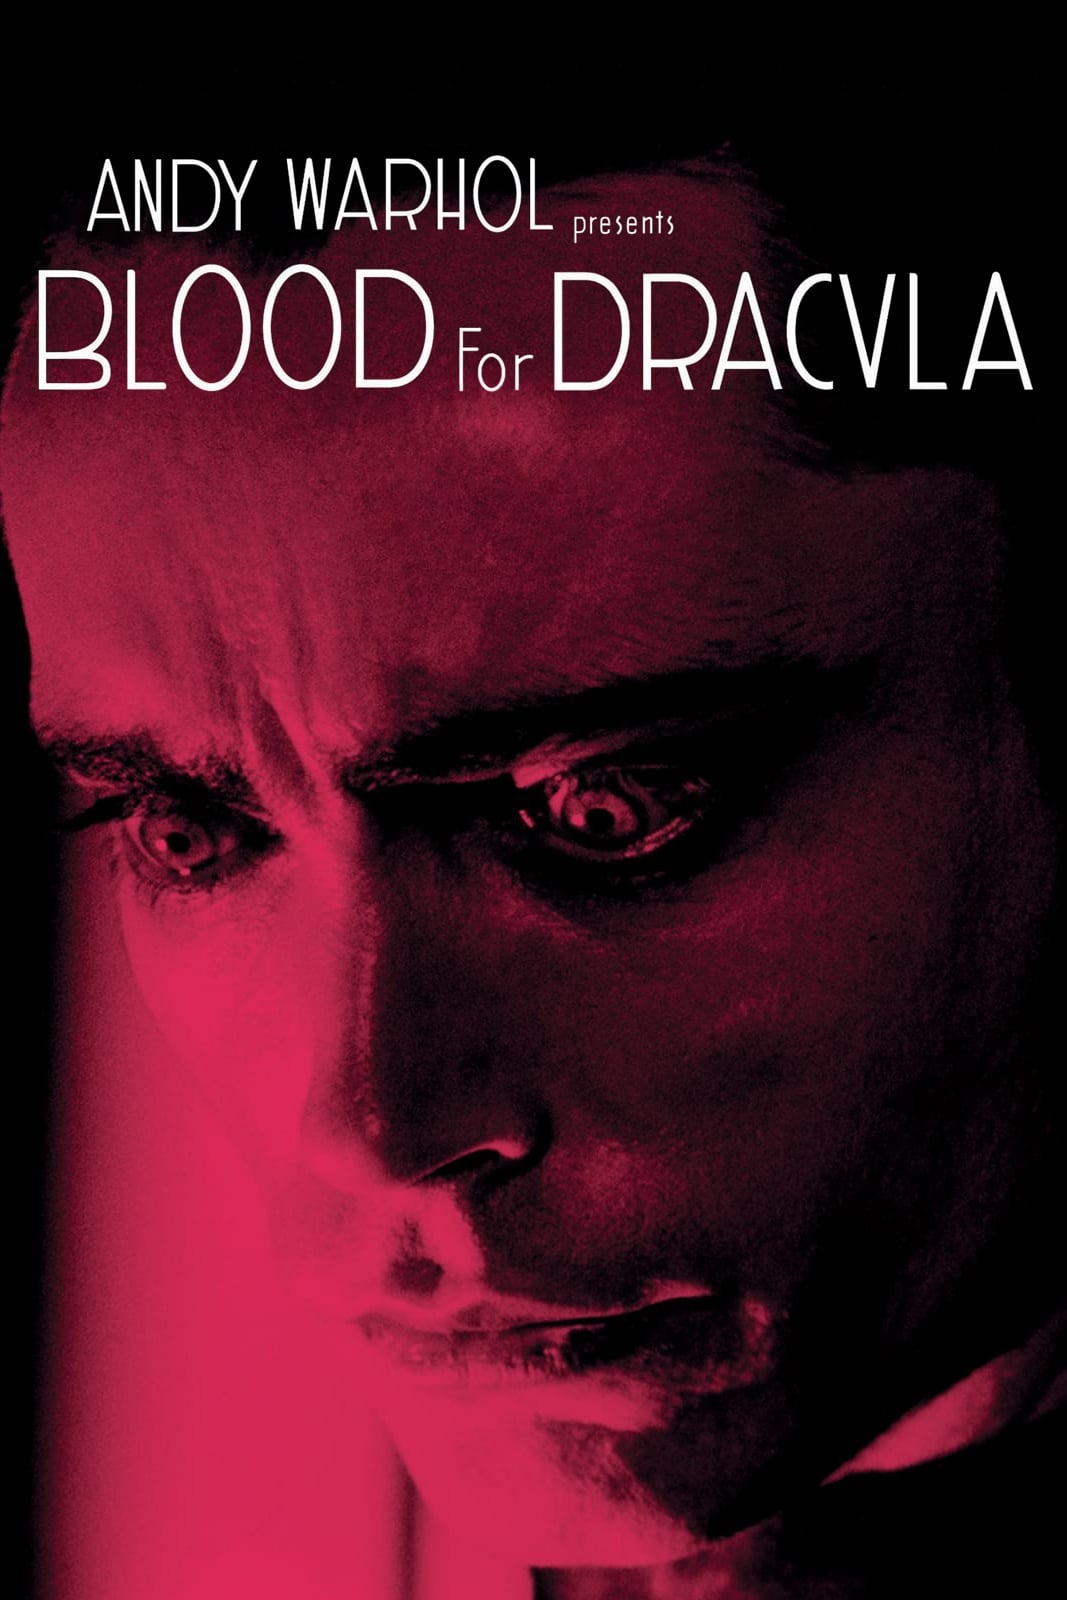 blood for dracula 1974 full movie download